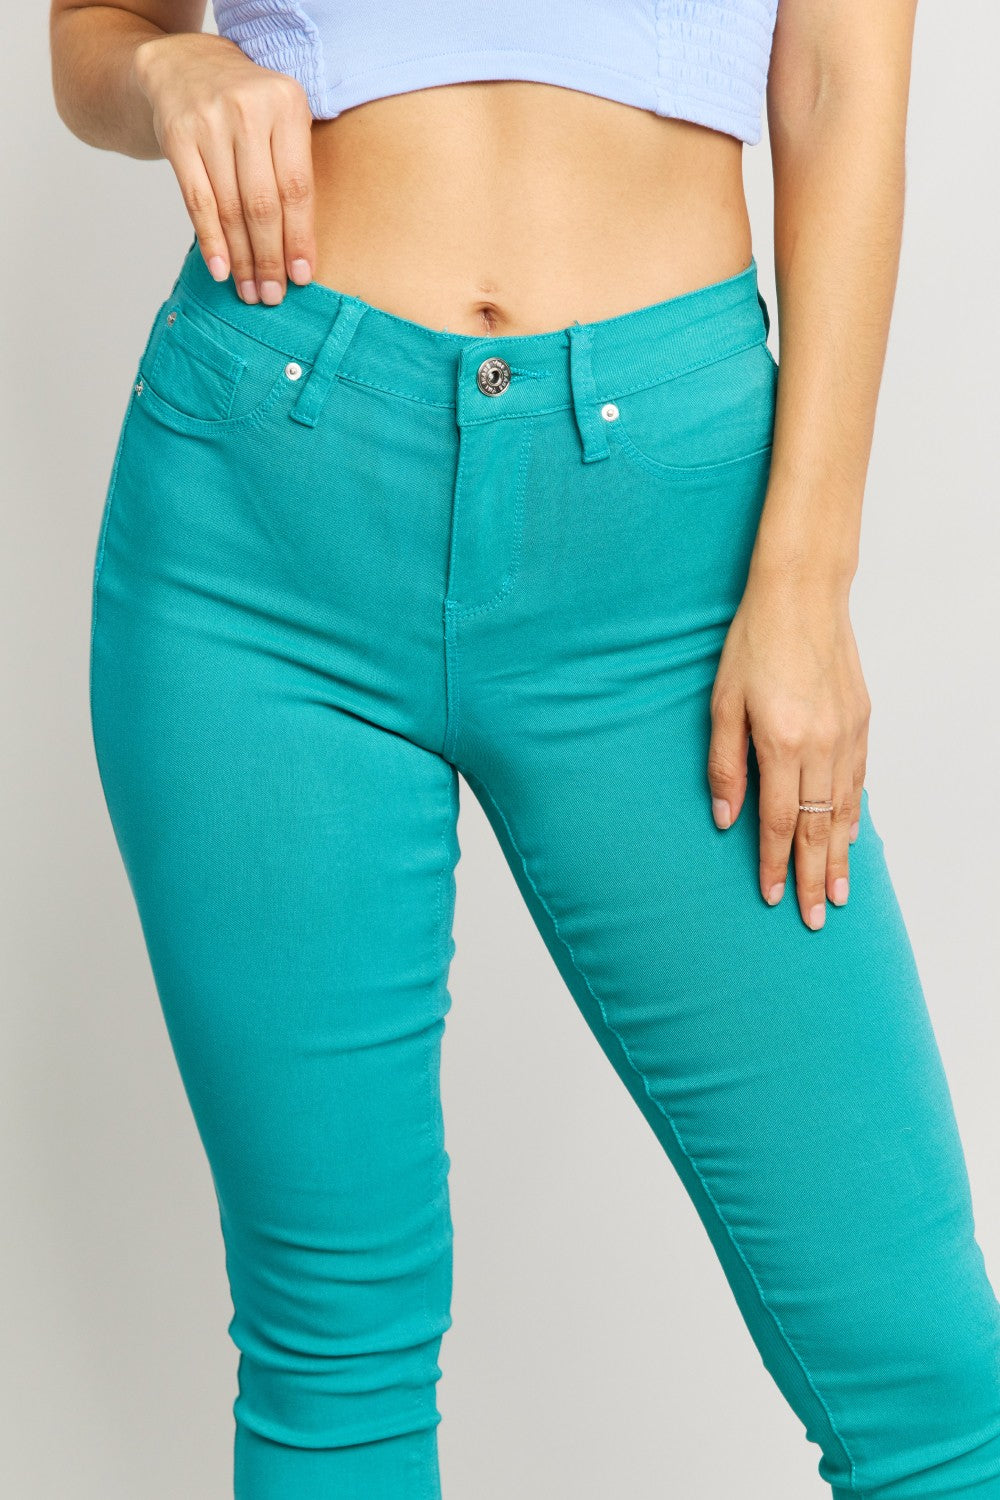 YMI Jeanswear Kate Hyper-Stretch Full Size Mid-Rise Skinny Jeans in Sea Green - ONLINE ONLY 2-10 DAY SHIPPING